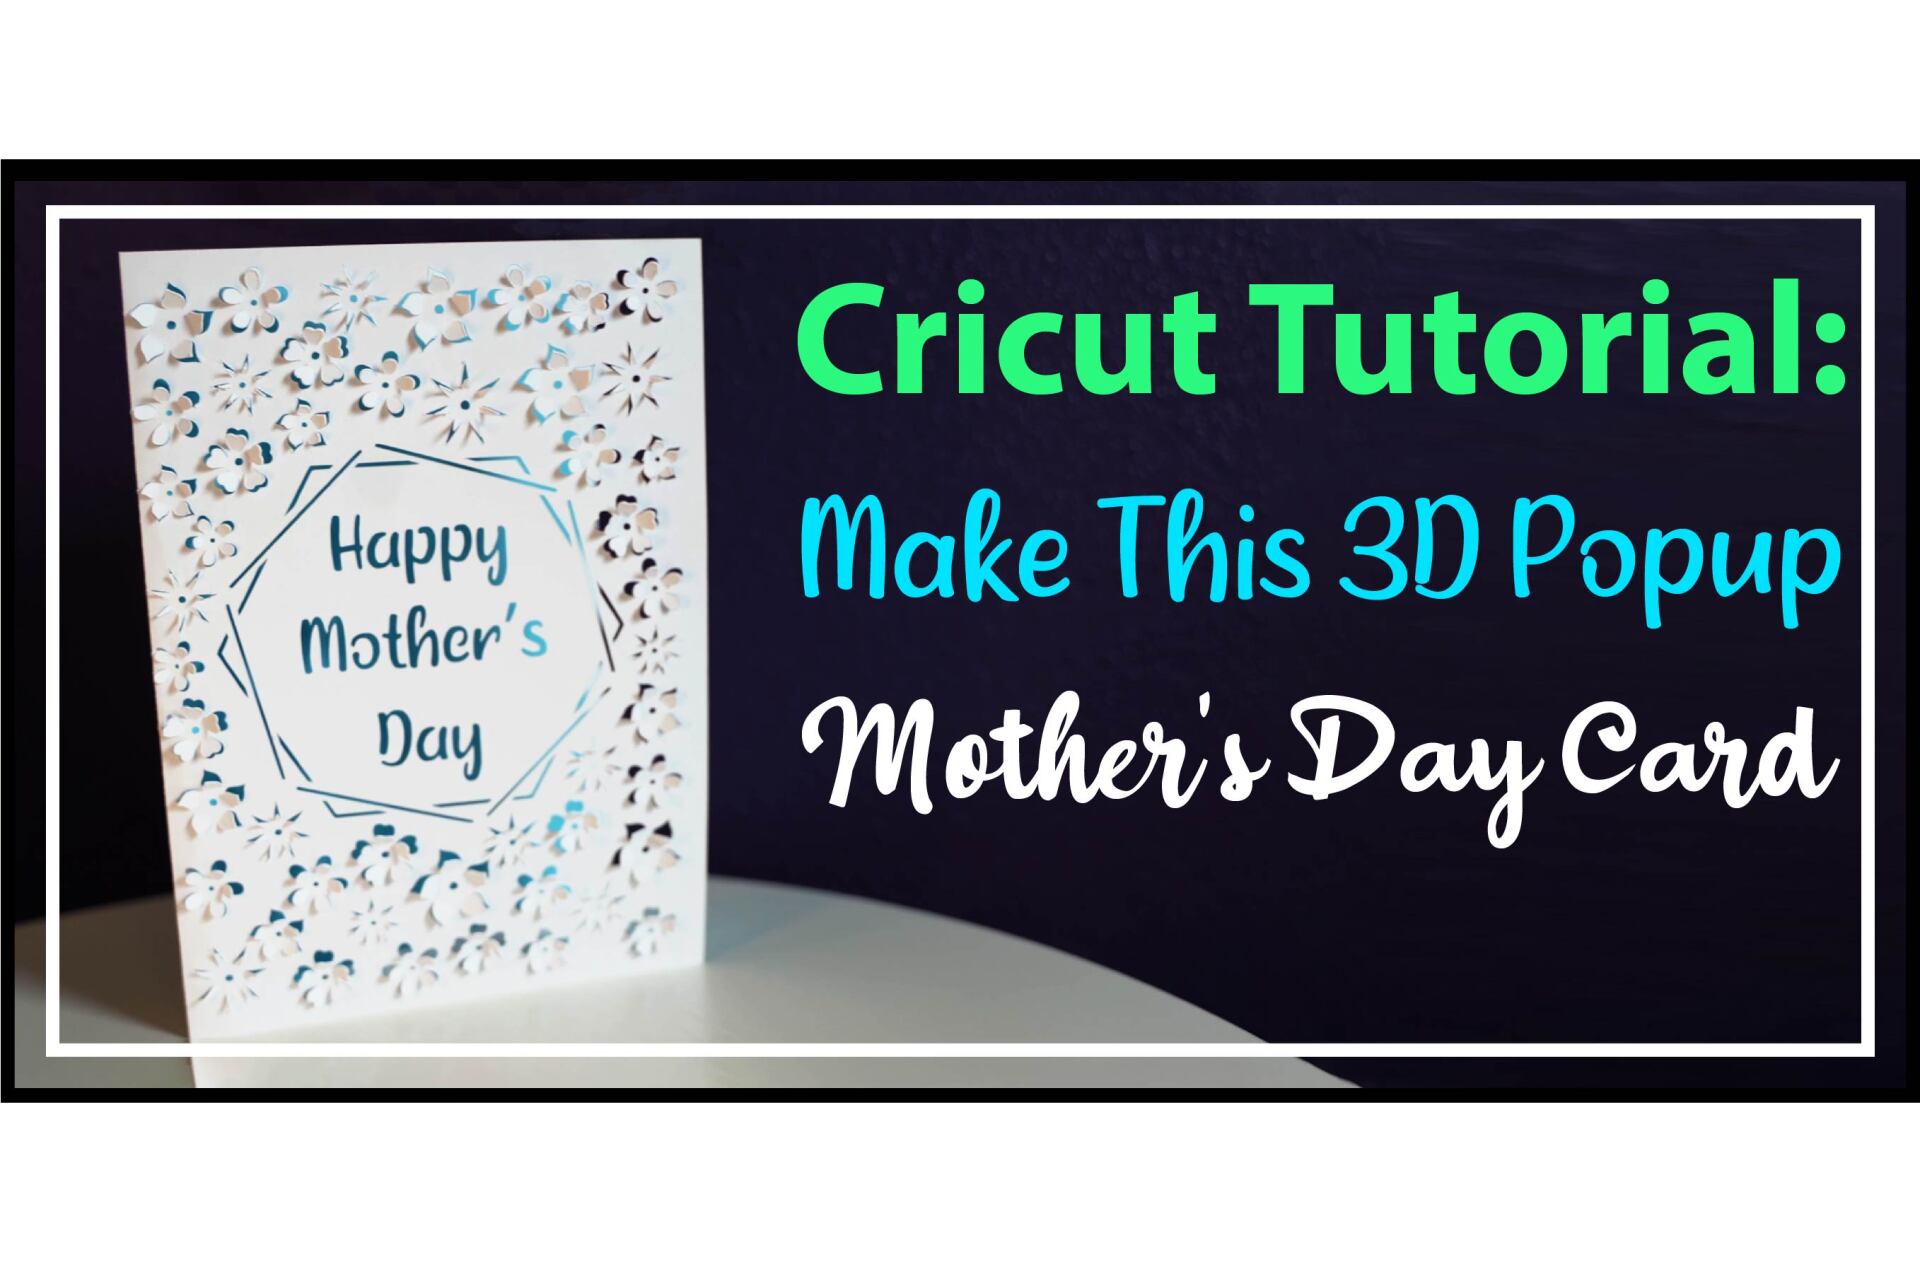 How to Make Cricut DIY Mother’s Day Popup Cards